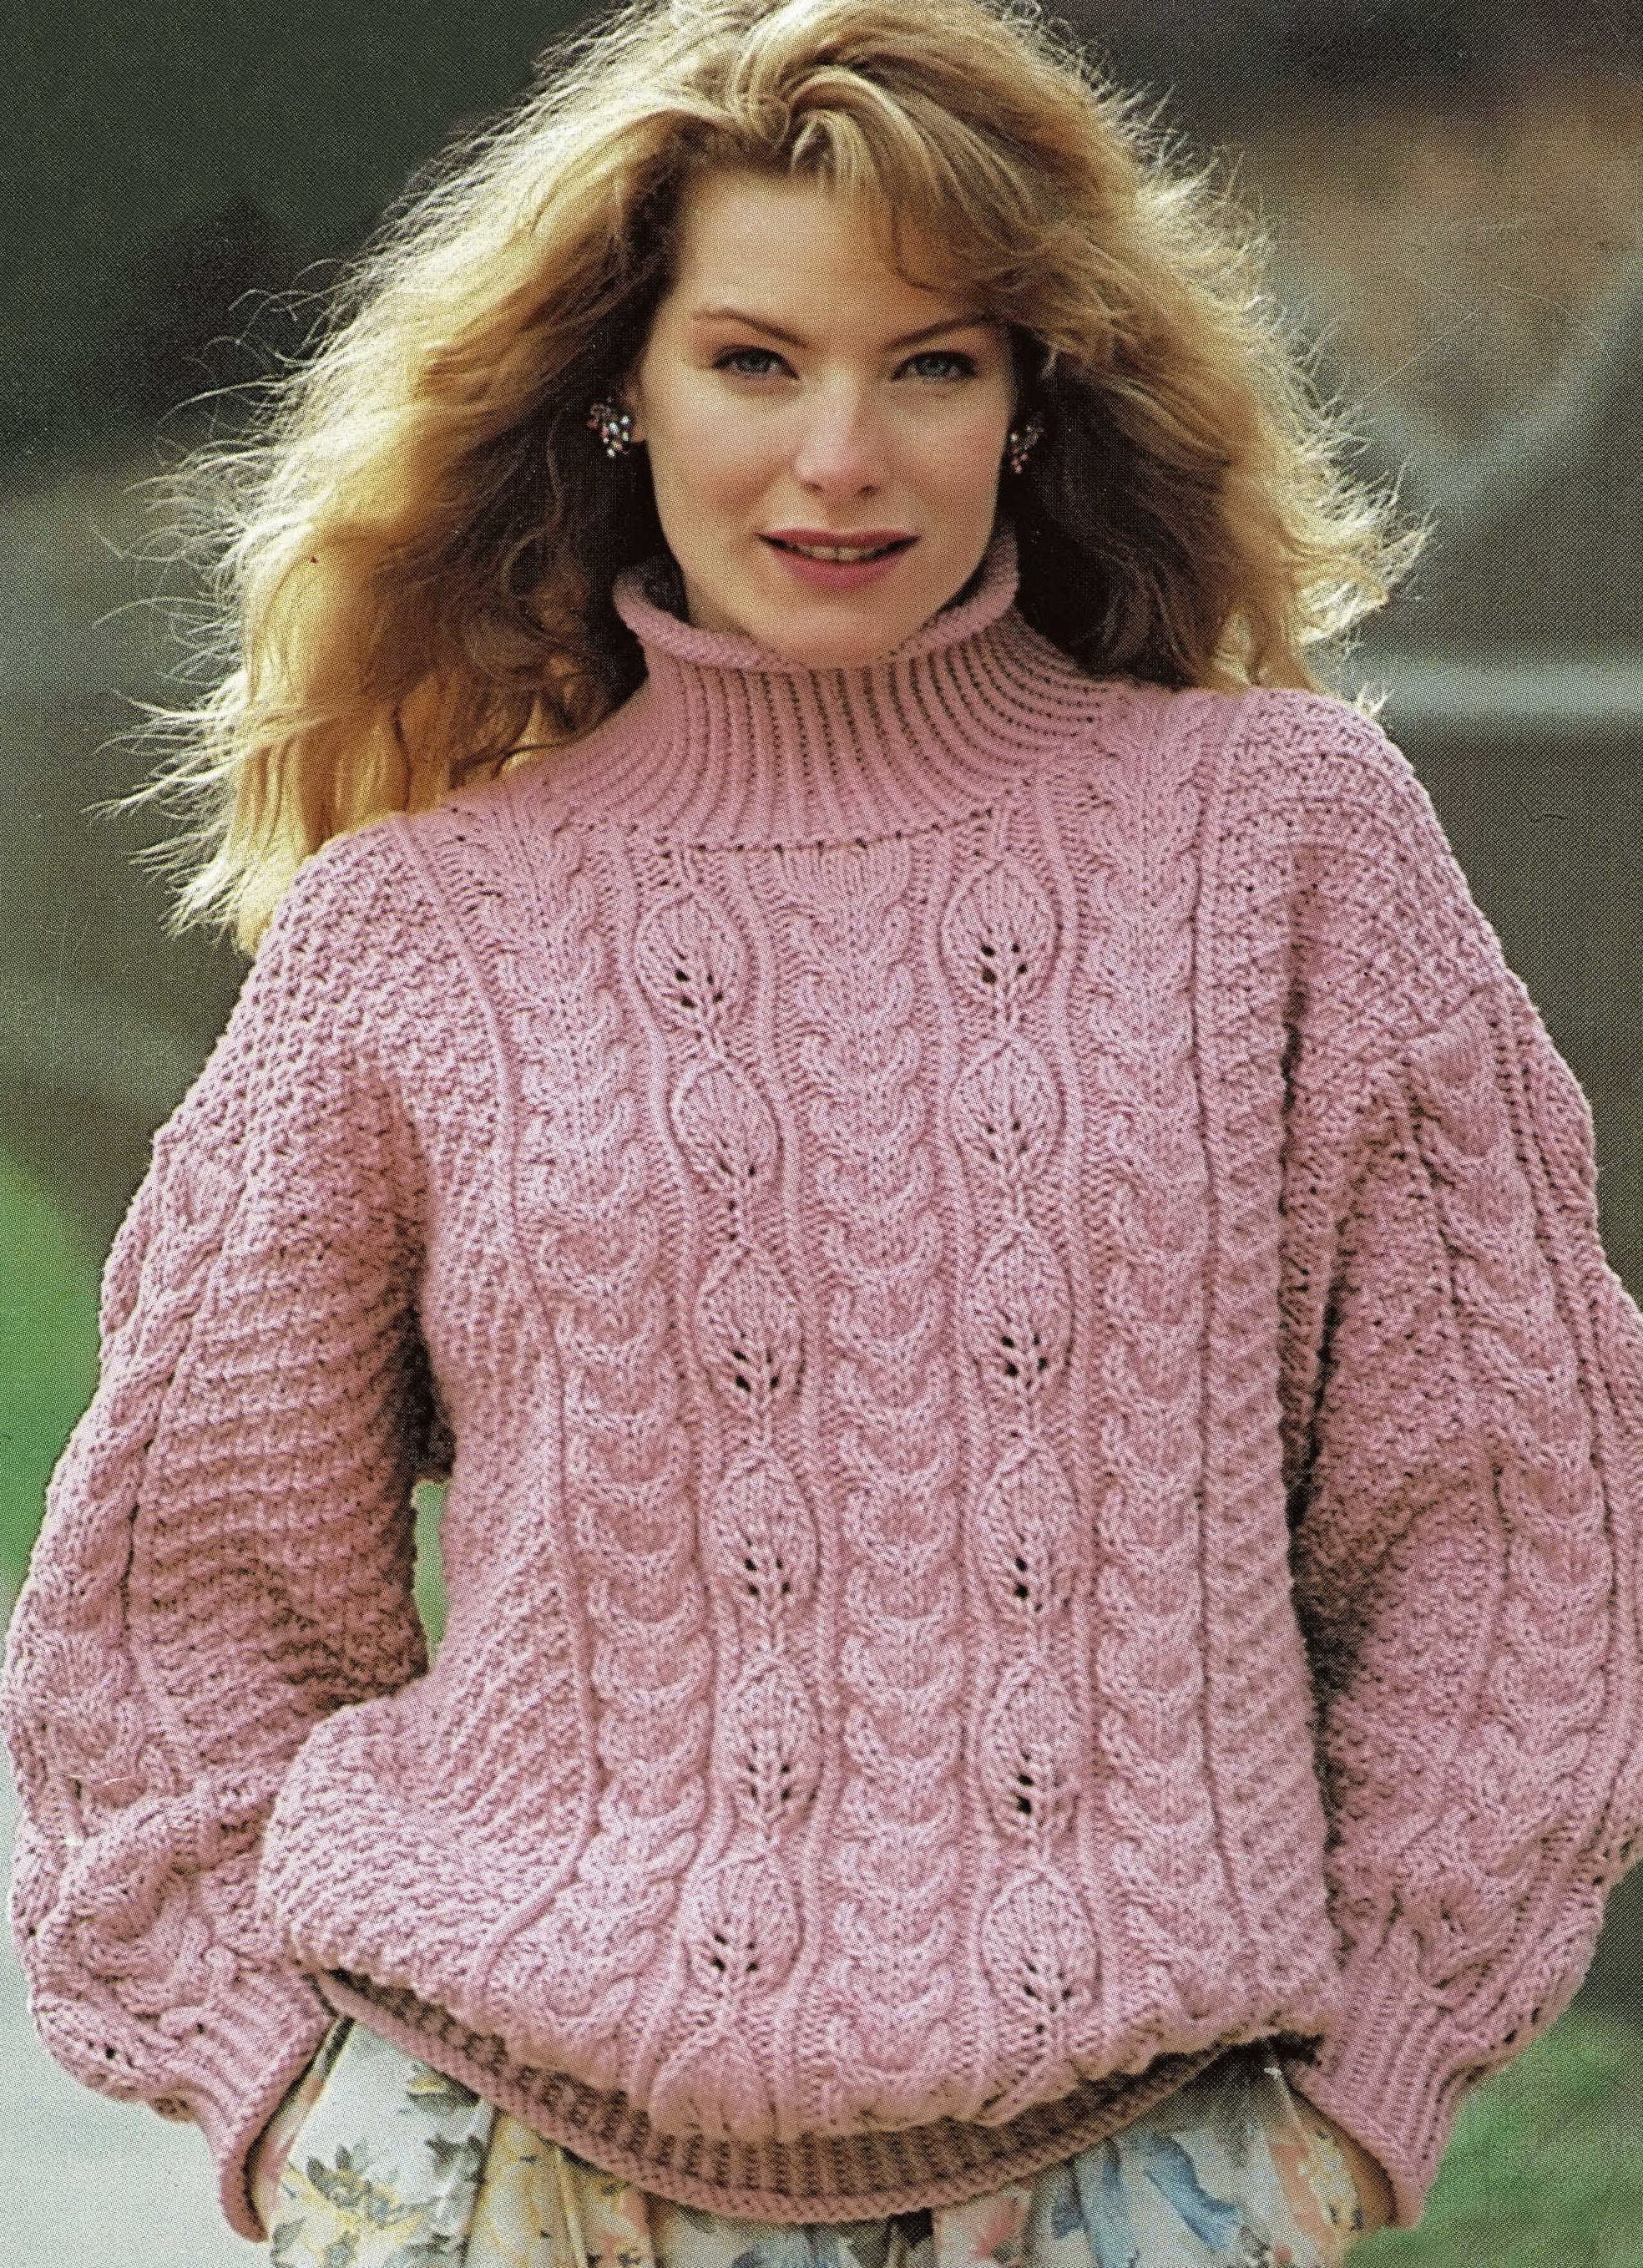 Ladies Gorgeous Aran Look Sweater with Cable and Leaf Pattern